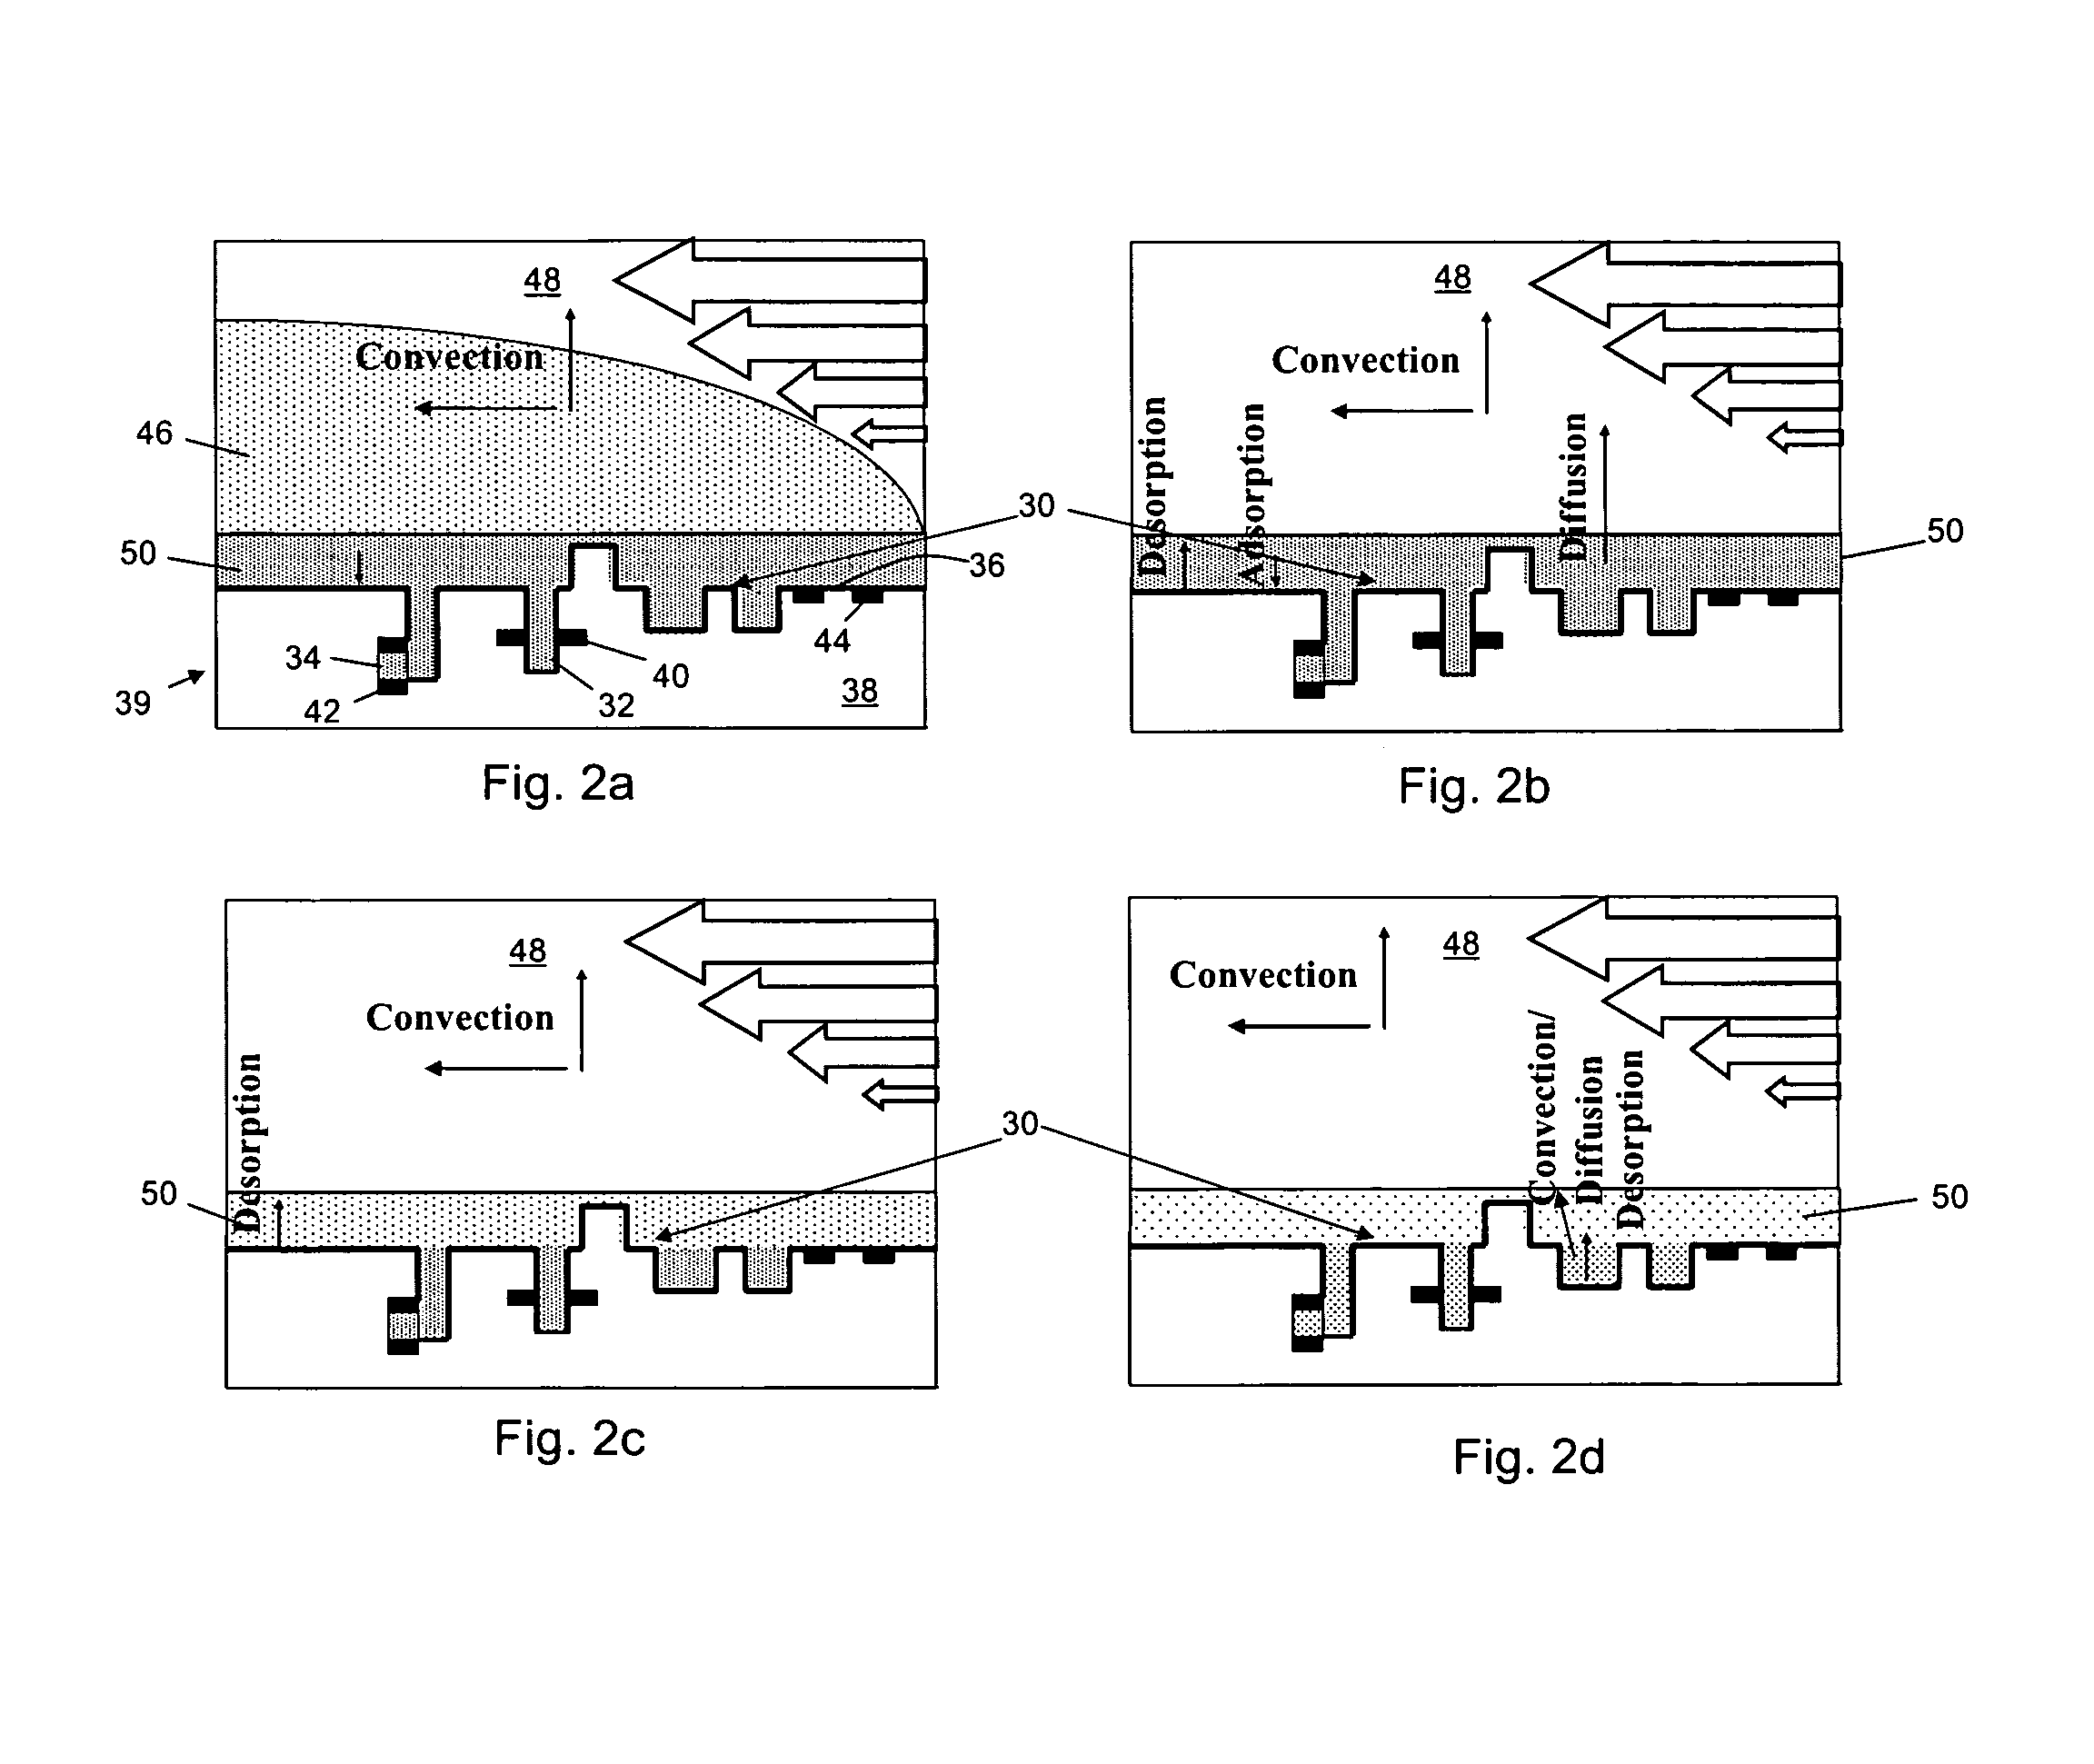 Method of design optimization and monitoring the clean/rinse/dry processes of patterned wafers using an electro-chemical residue sensor (ECRS)